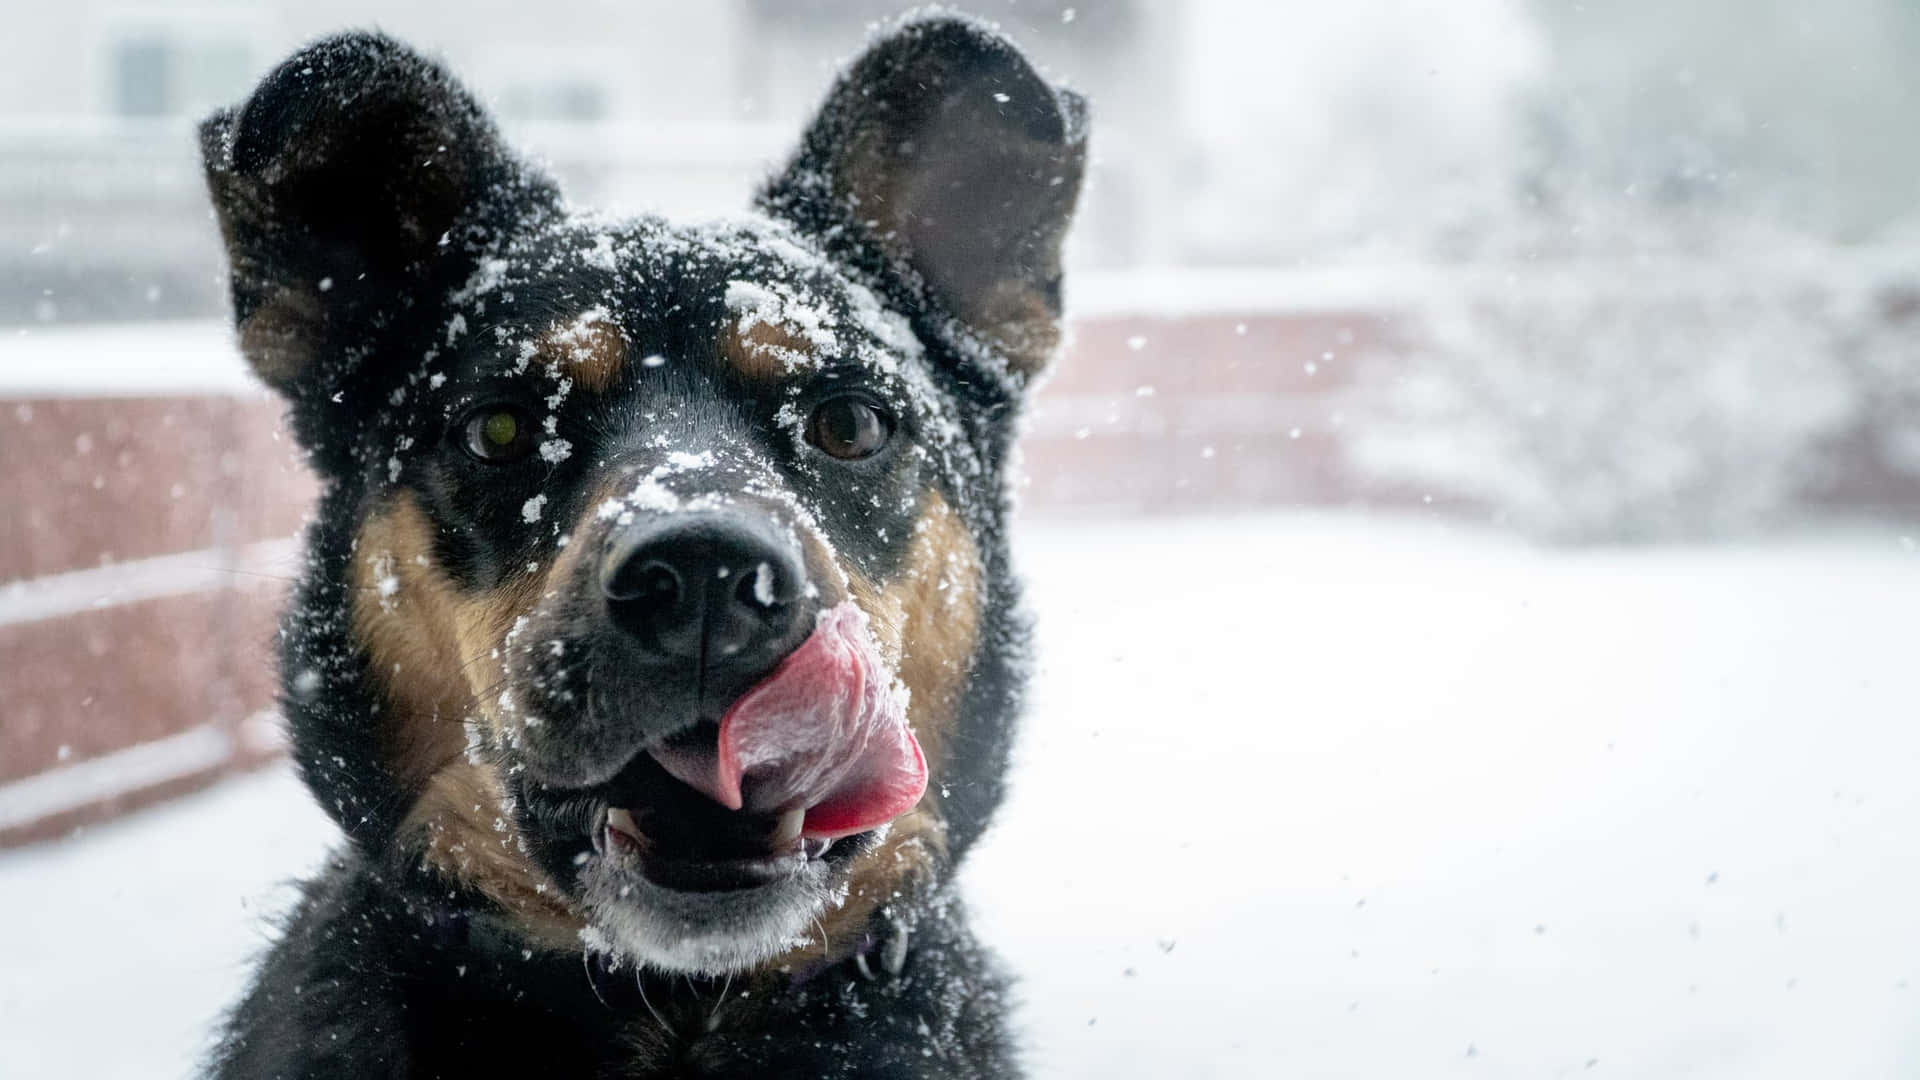 "Dogs enjoy winter too, look at this one!" Wallpaper